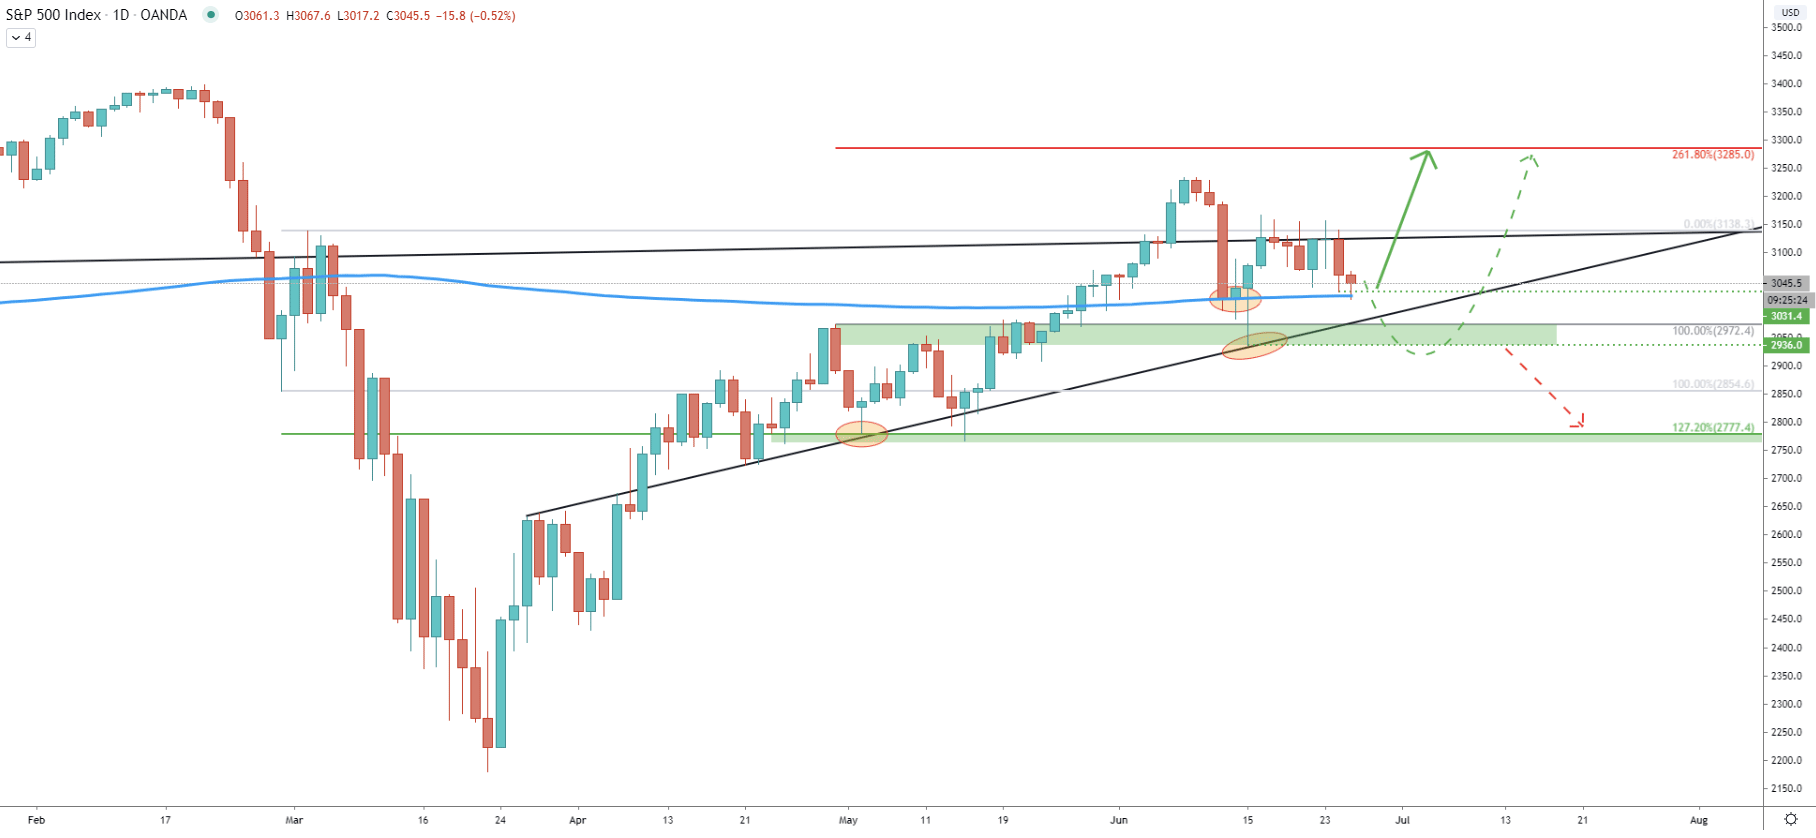 S&P500 Daily Technical Analysis 25 June 2020